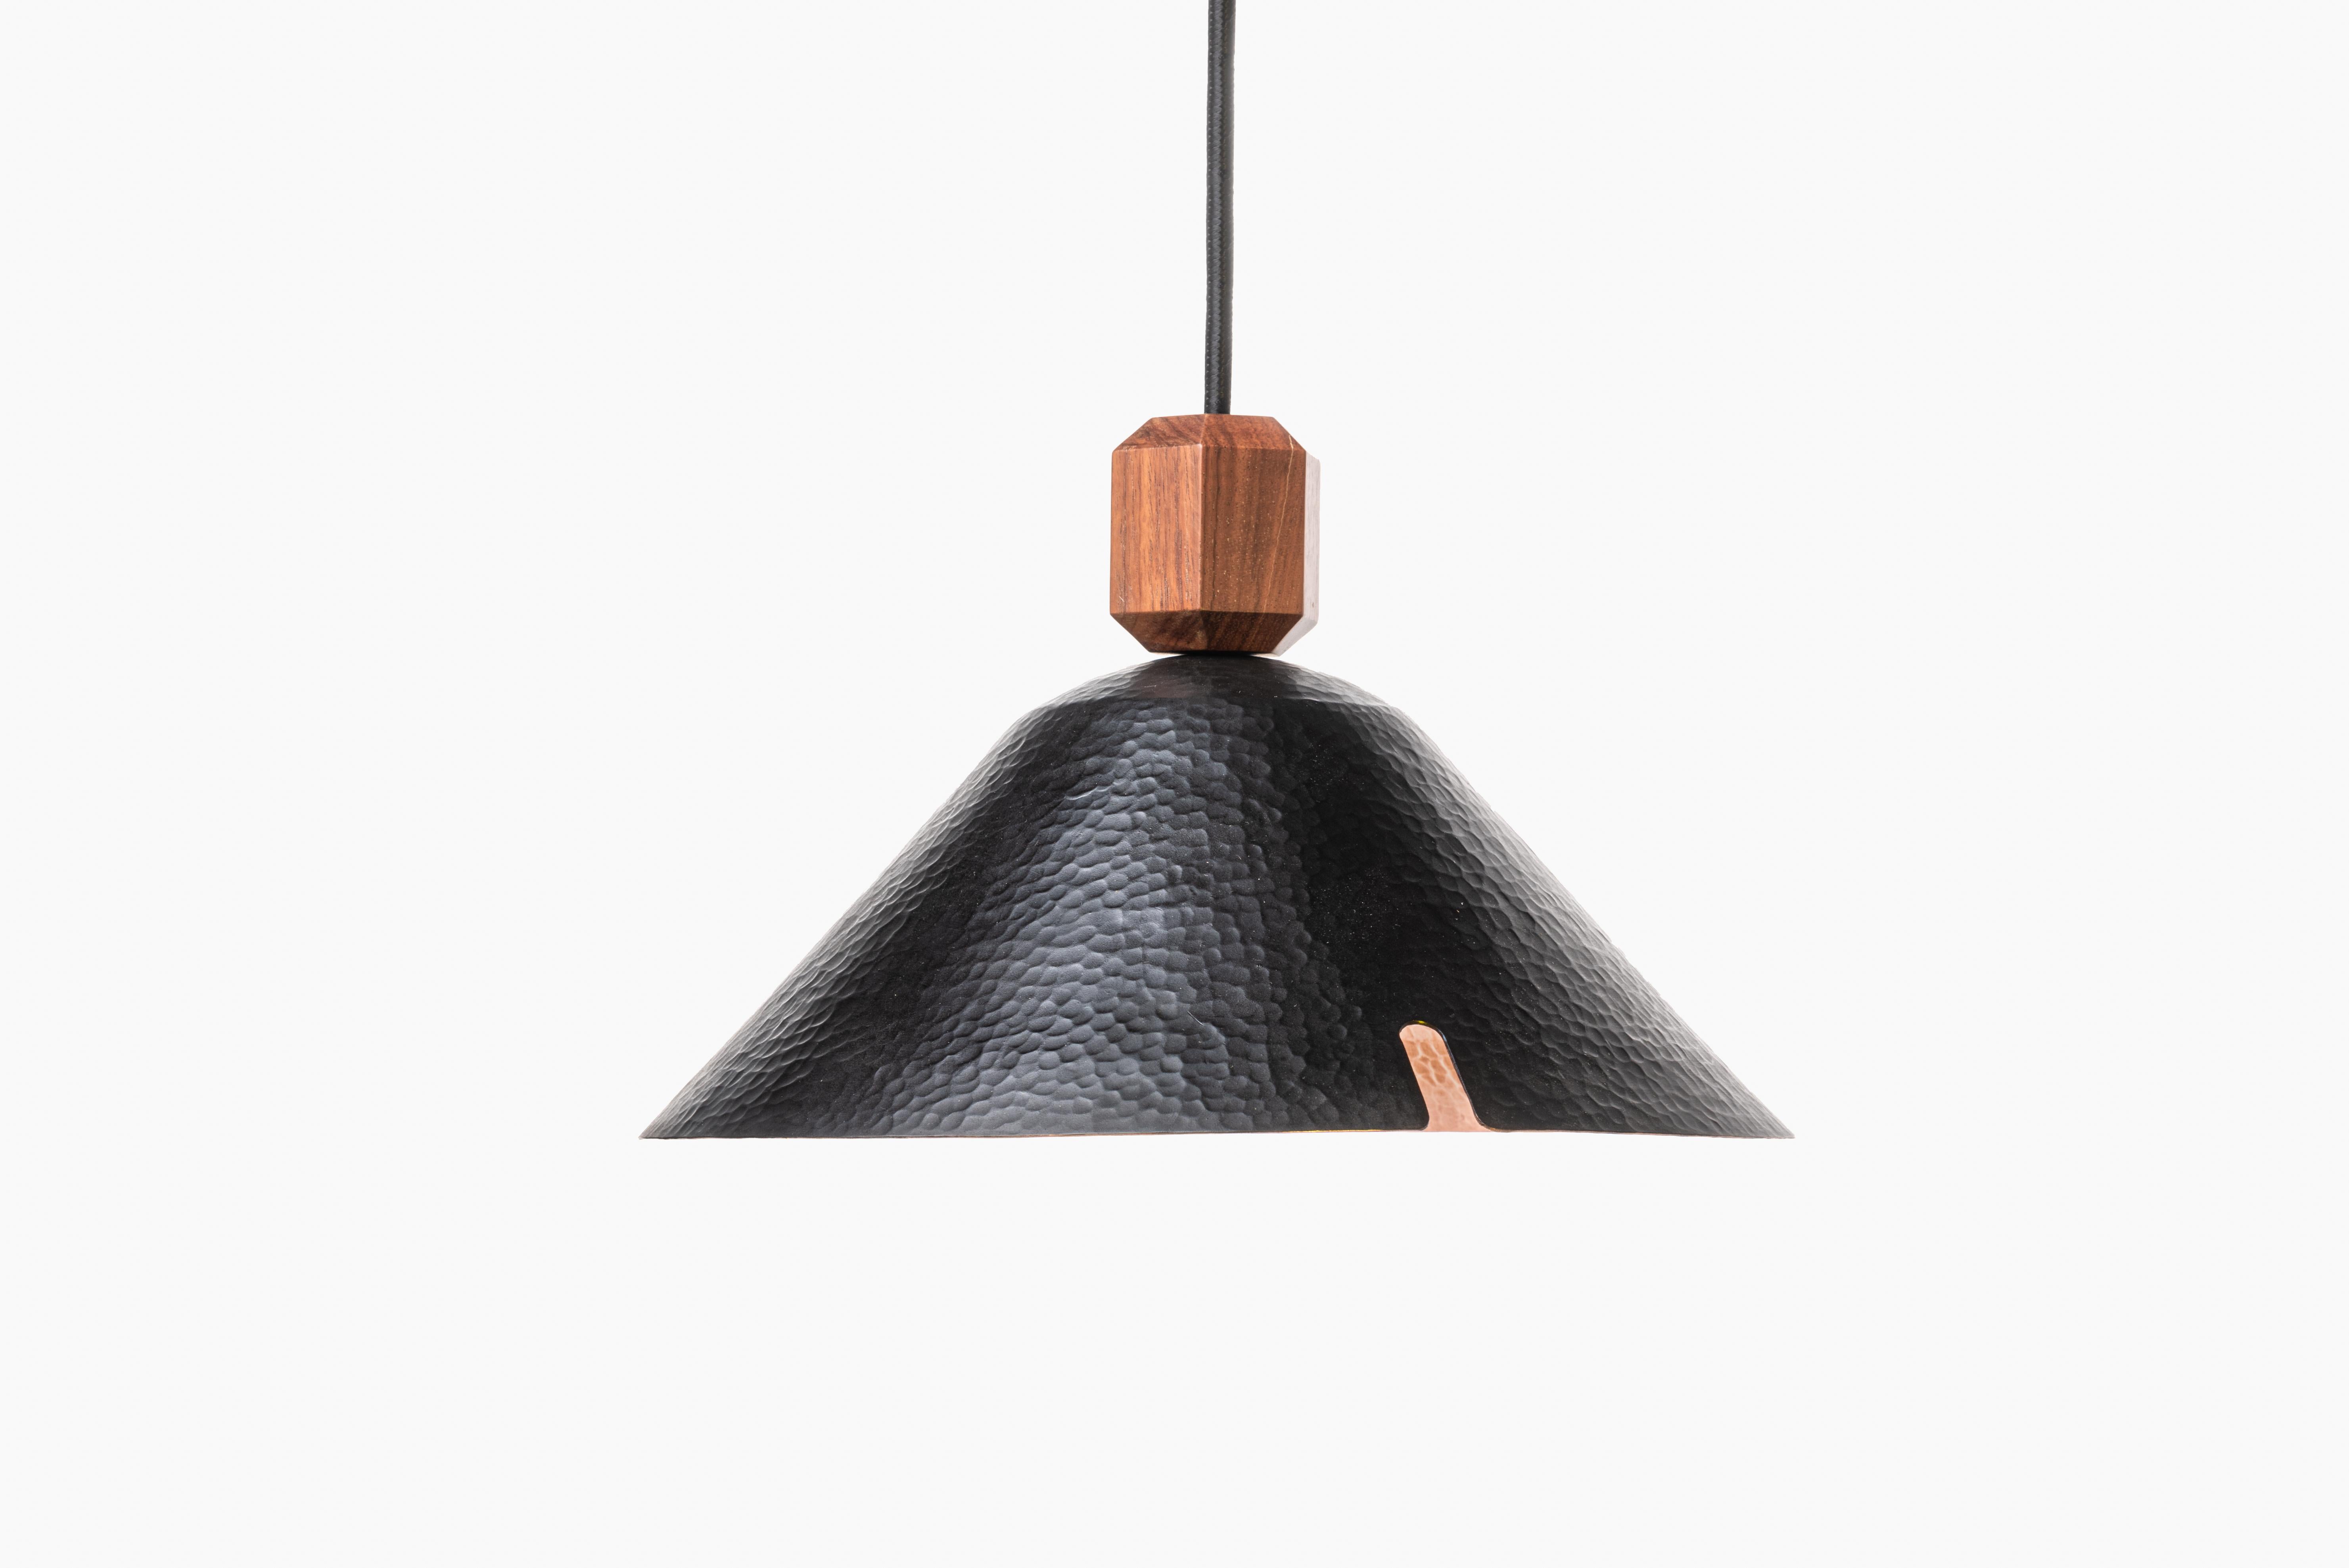 Hammered Copper Pendant Lamp Model V In New Condition For Sale In Zapopan, Jalisco. CP